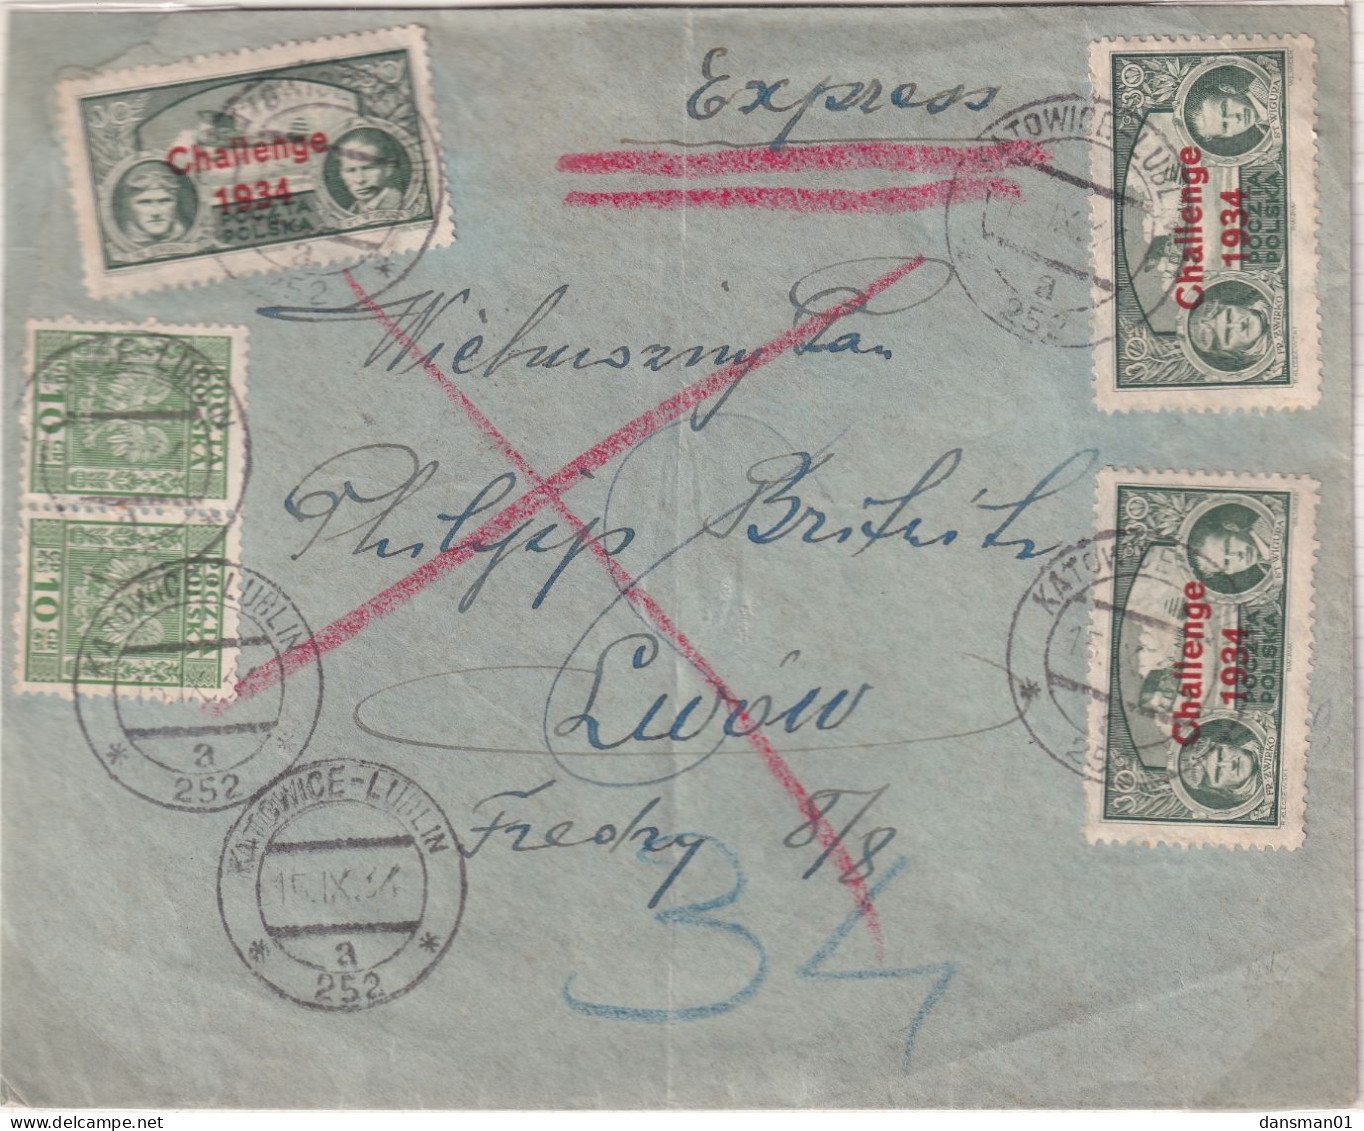 Poland 1934 Challenge Cover Fi 269 Katowice-Lublin To LWOW Railway Cancel - Covers & Documents